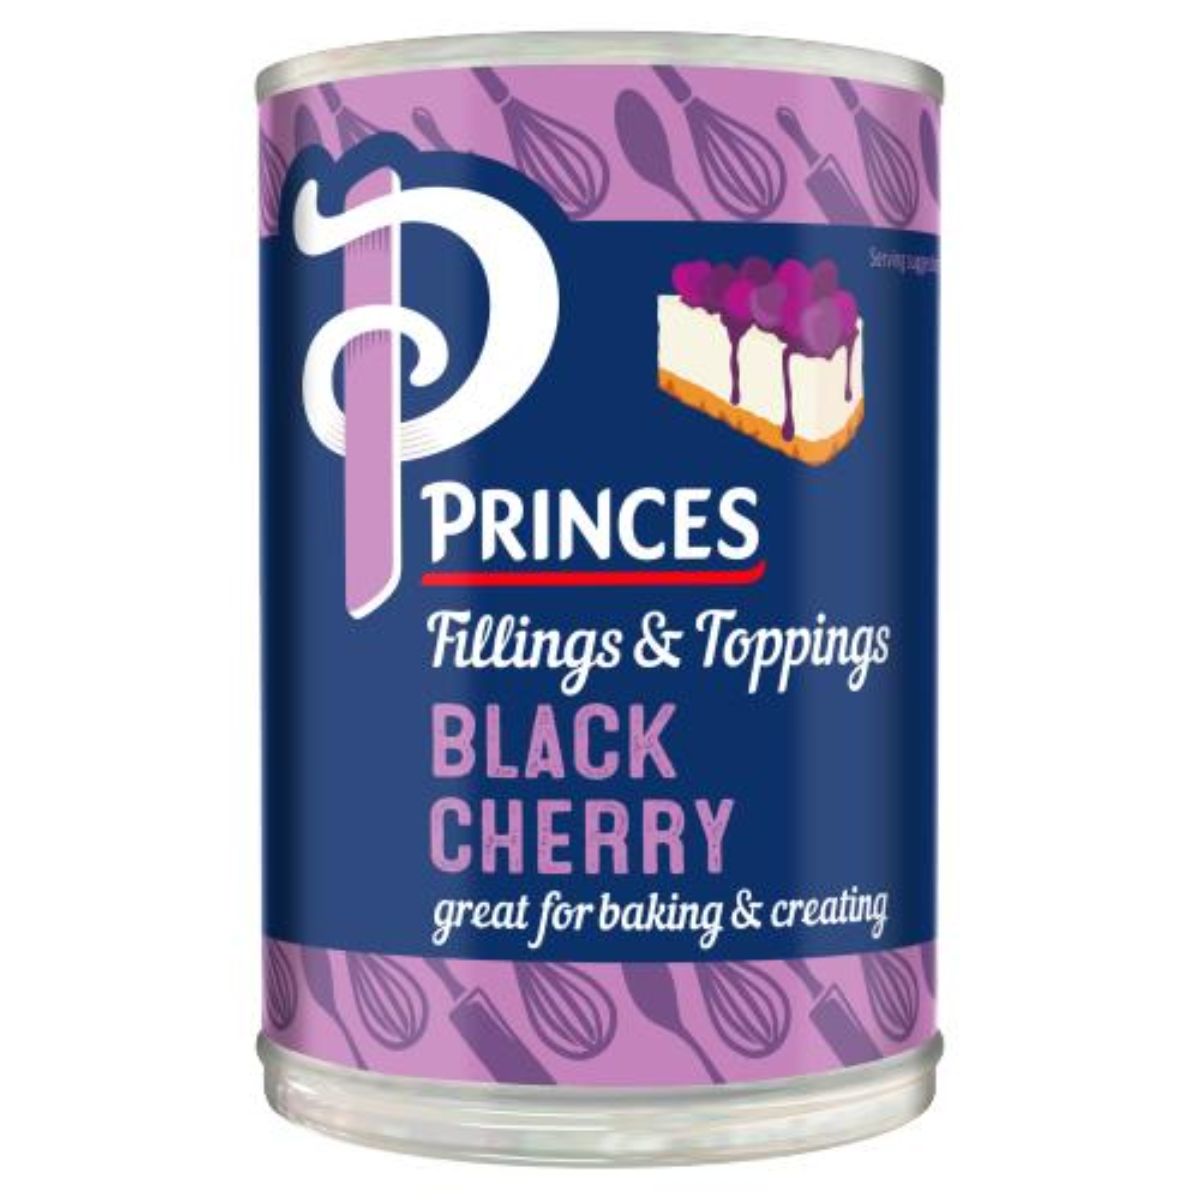 Princes - Black Cherry - 410g fillings & toppings